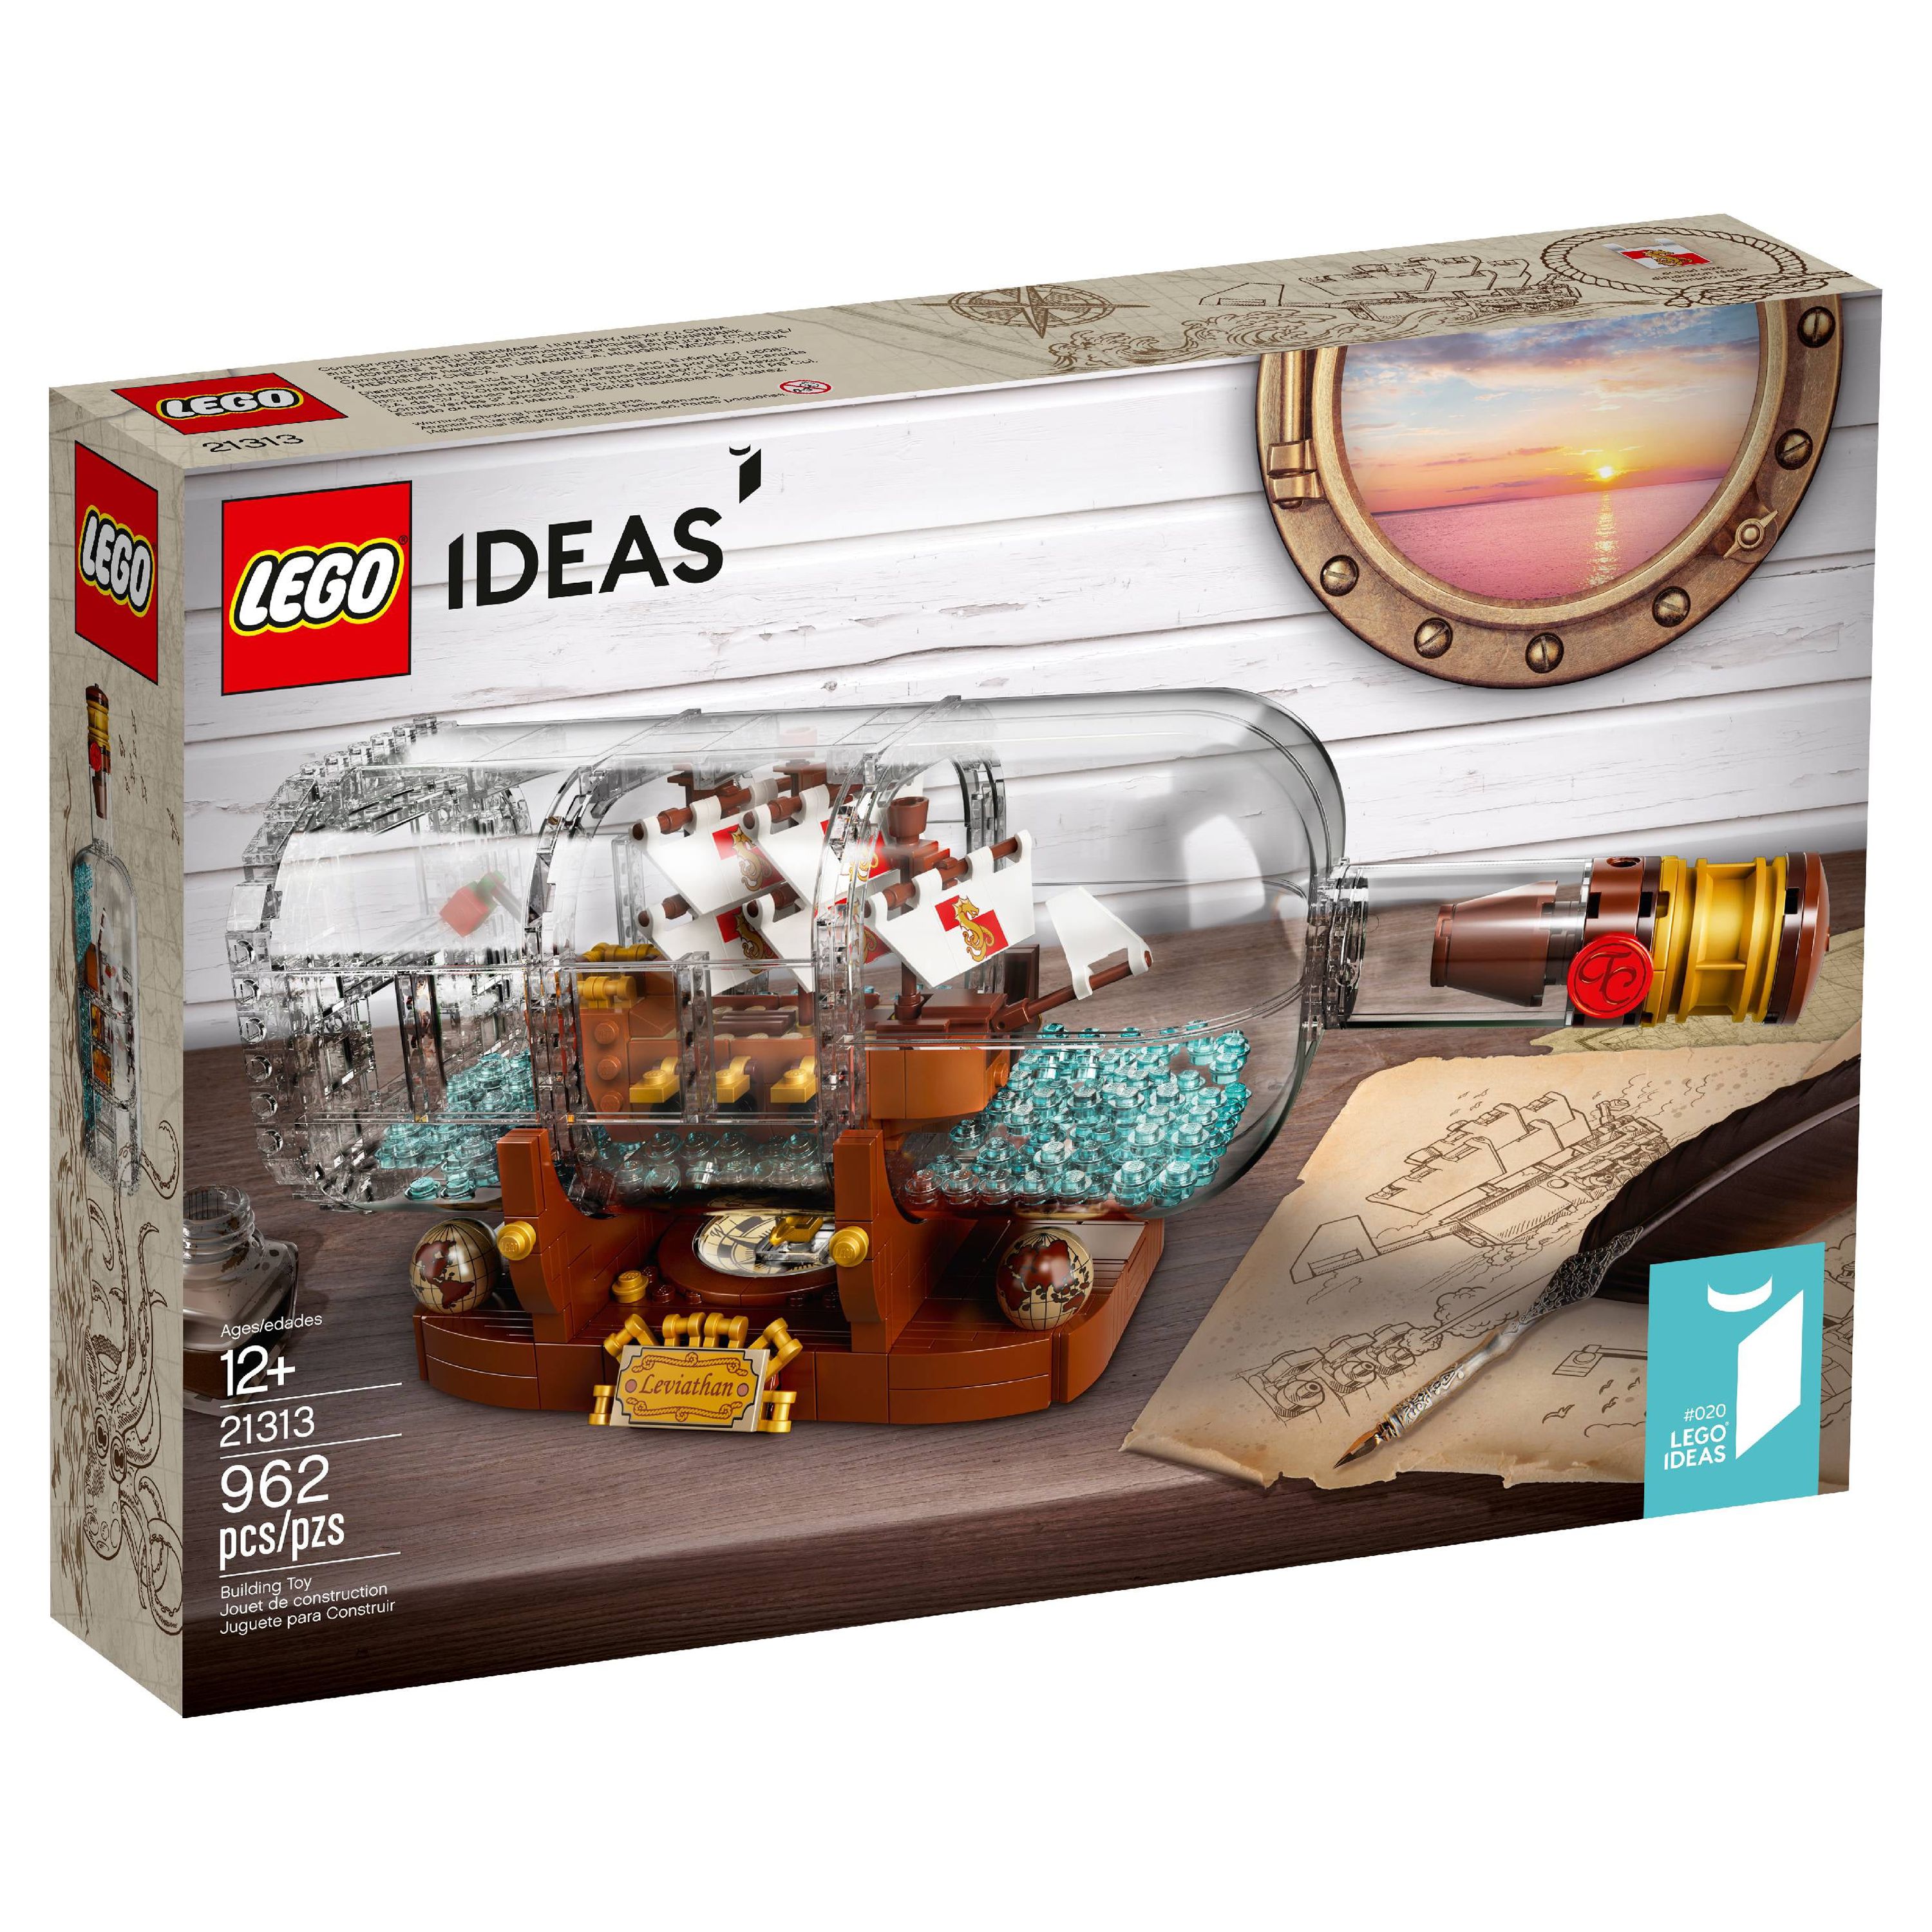 LEGO Ideas Ship in a Bottle&nbsp;21313 - image 3 of 6